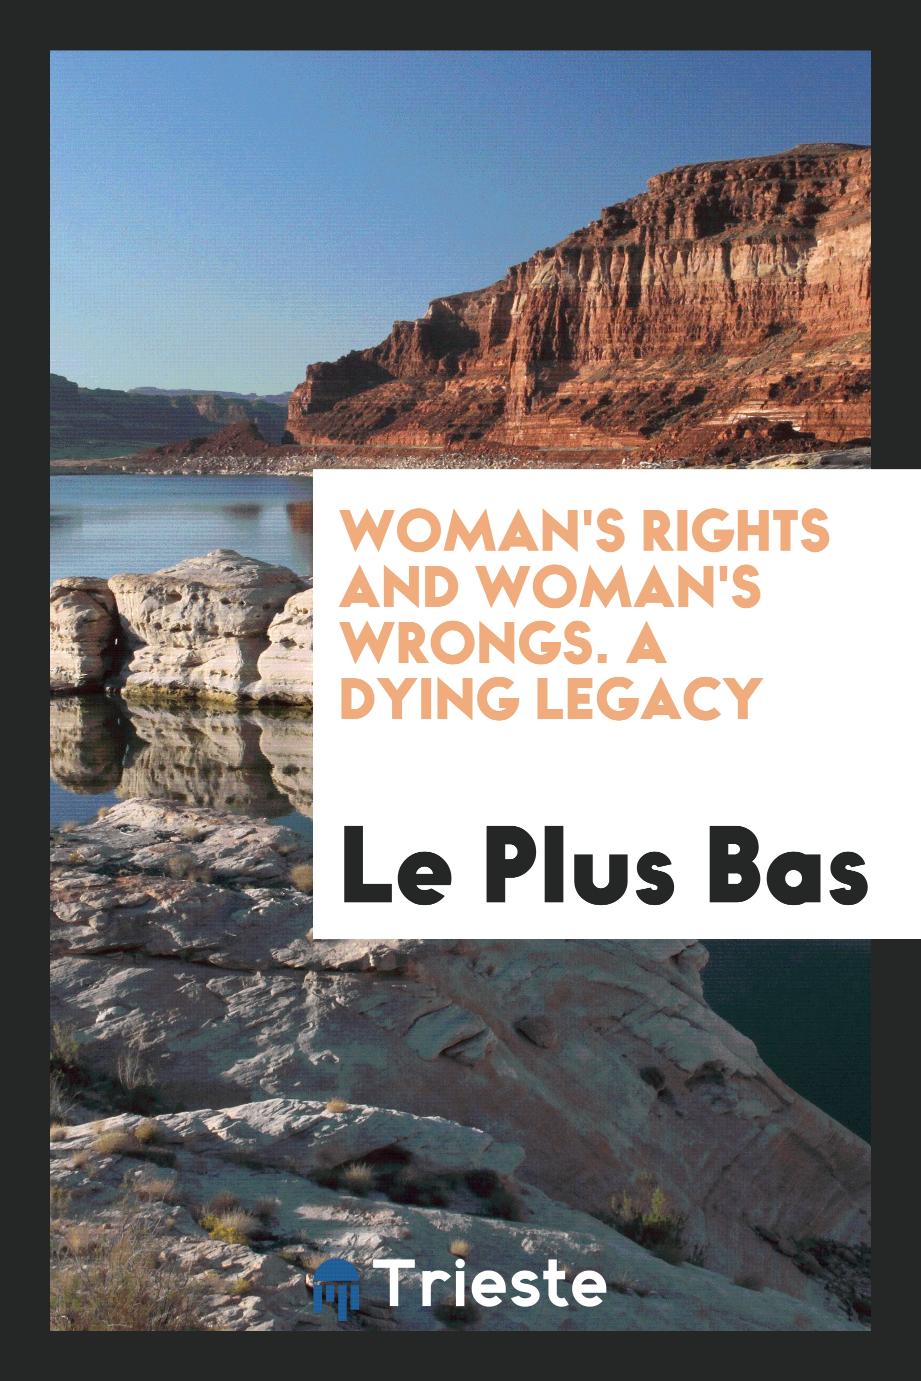 Woman's rights and woman's wrongs. A dying legacy